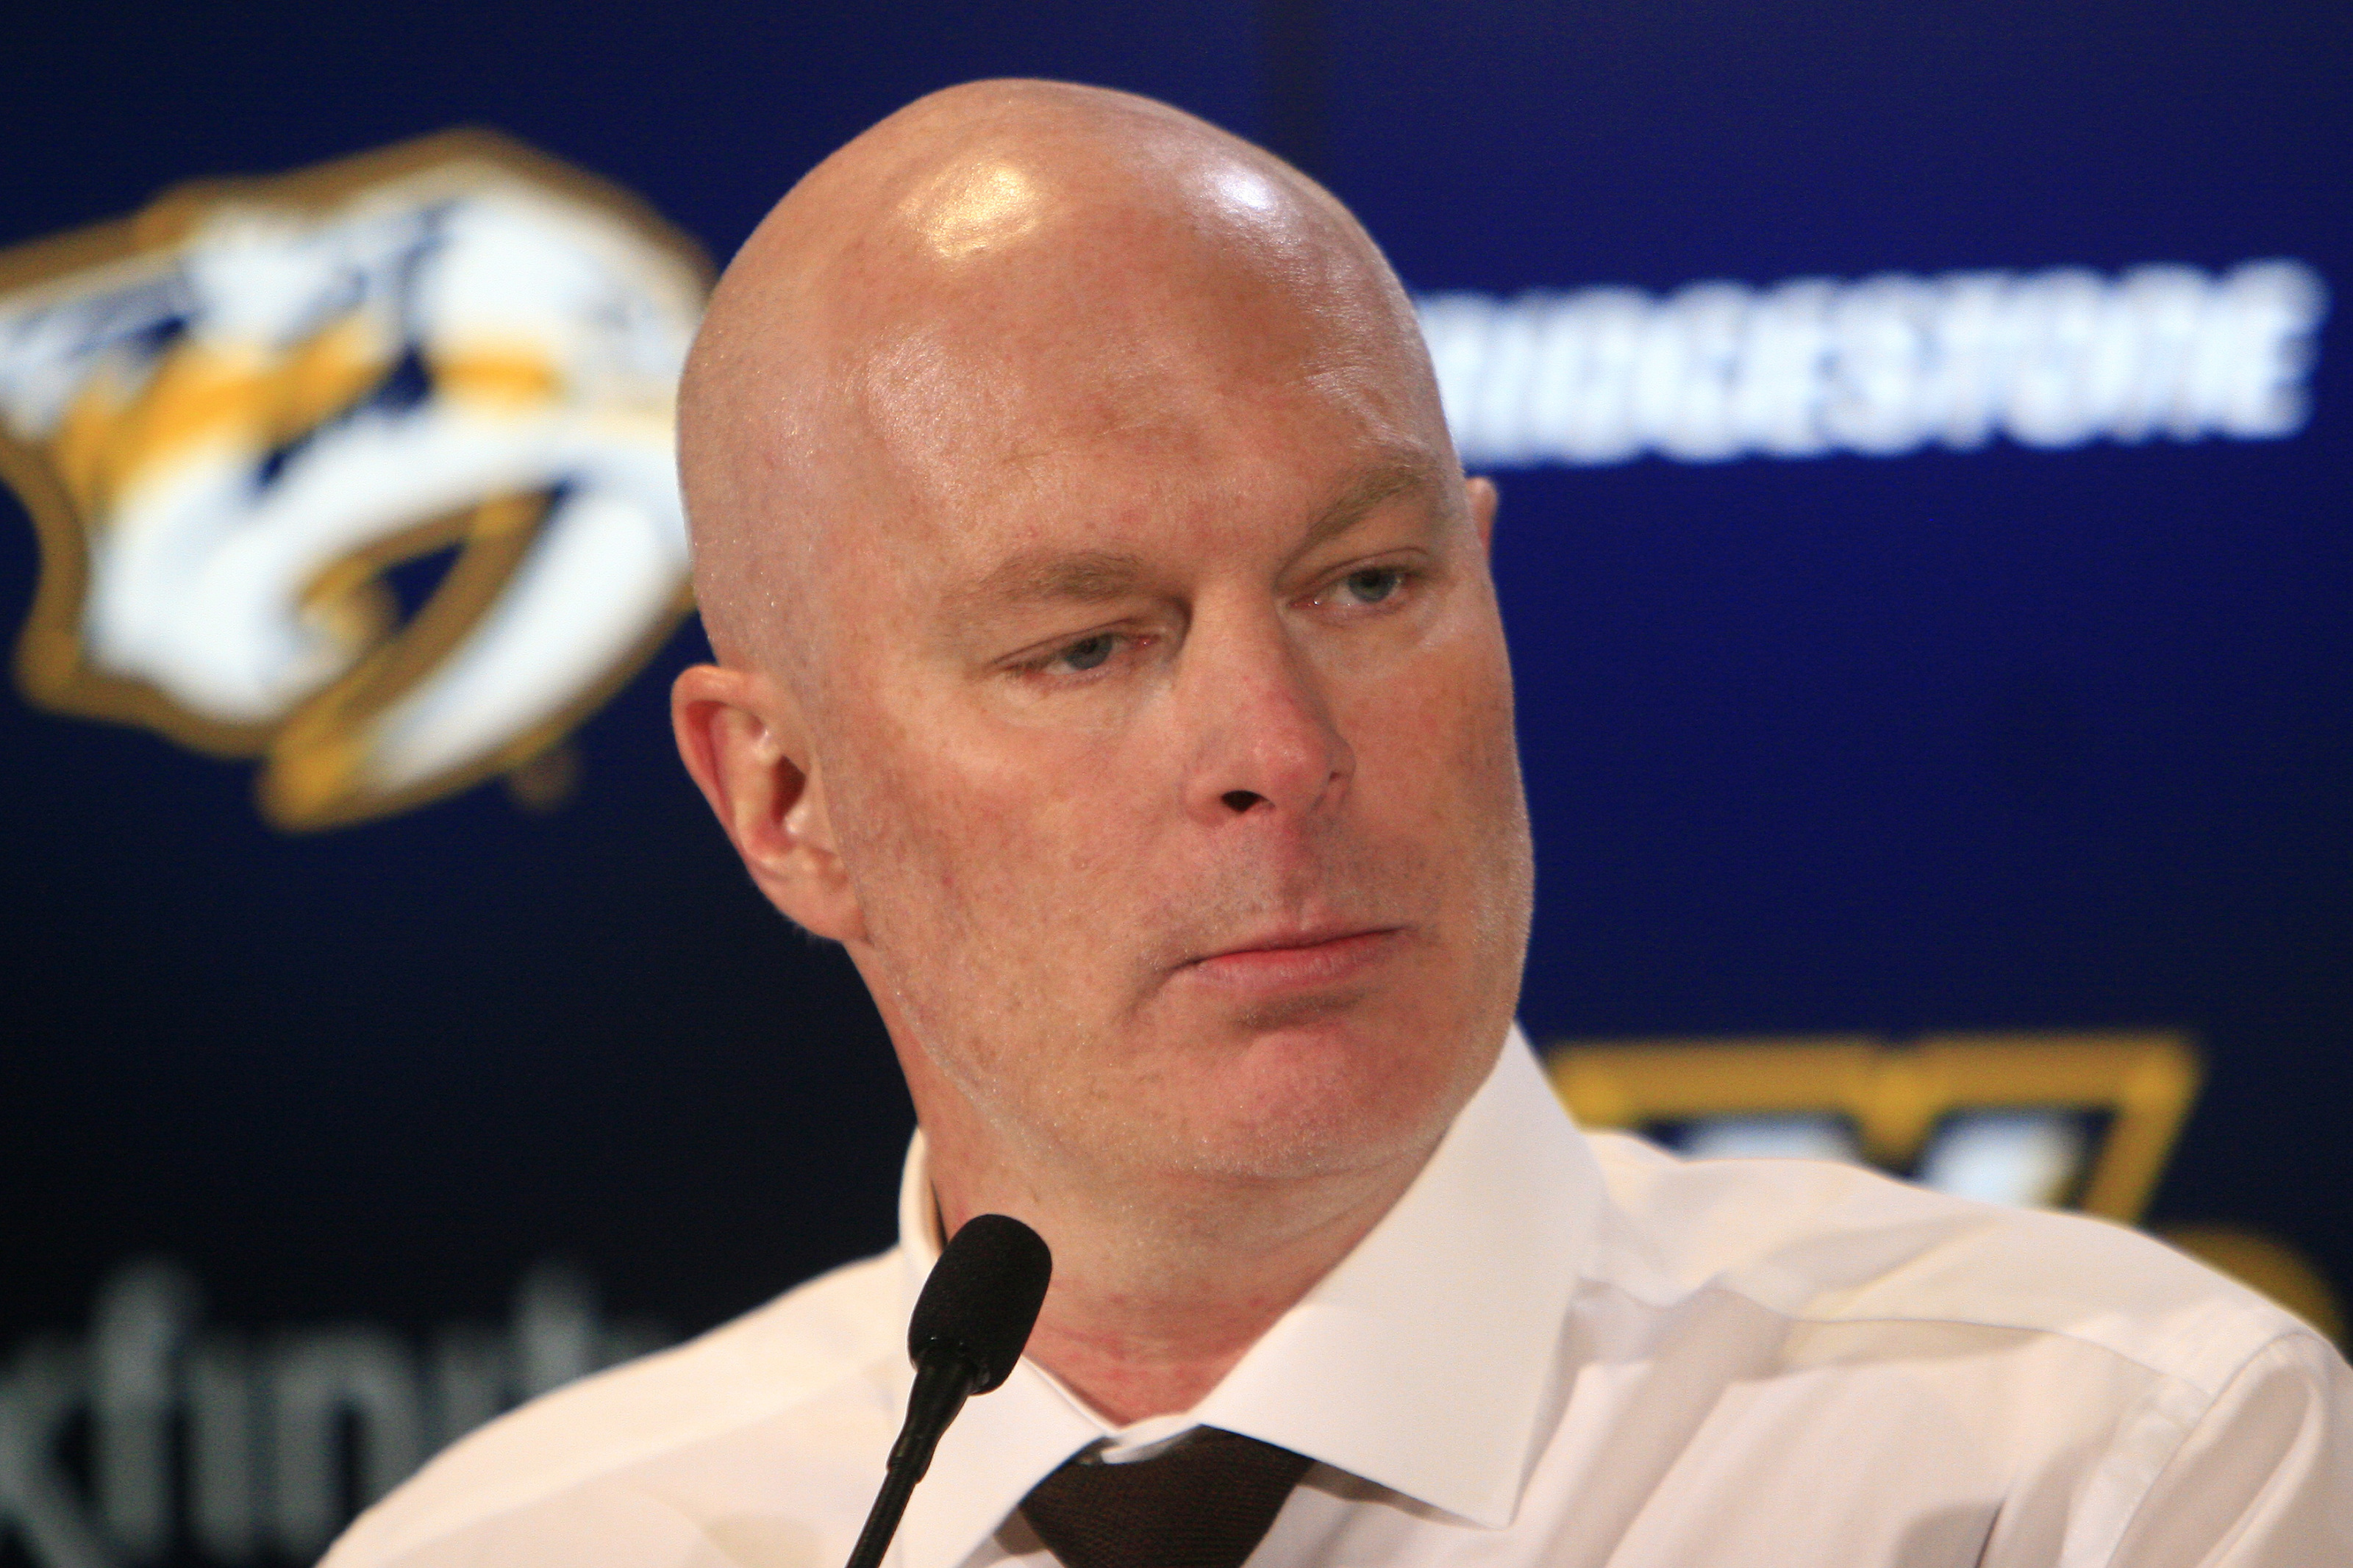 New Jersey Devils relieve John Hynes of head coaching duties, name